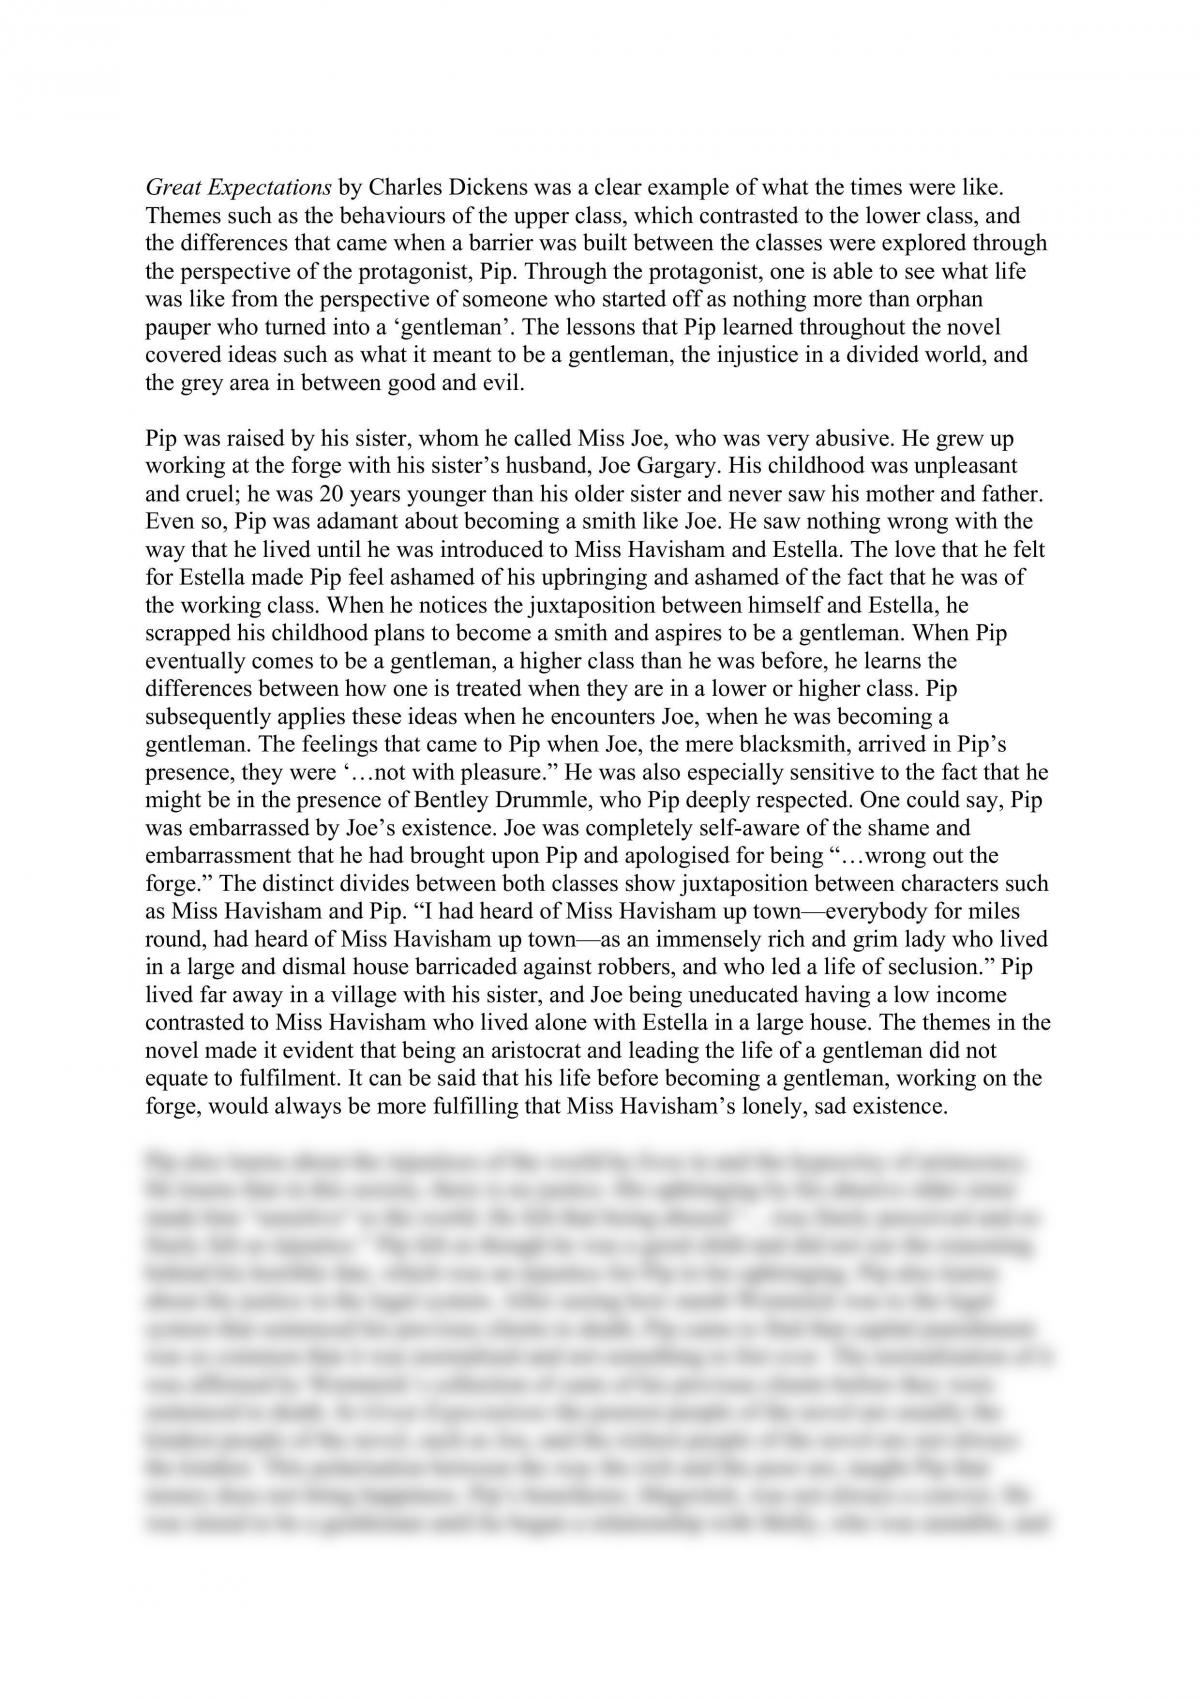 great expectations literary analysis essay